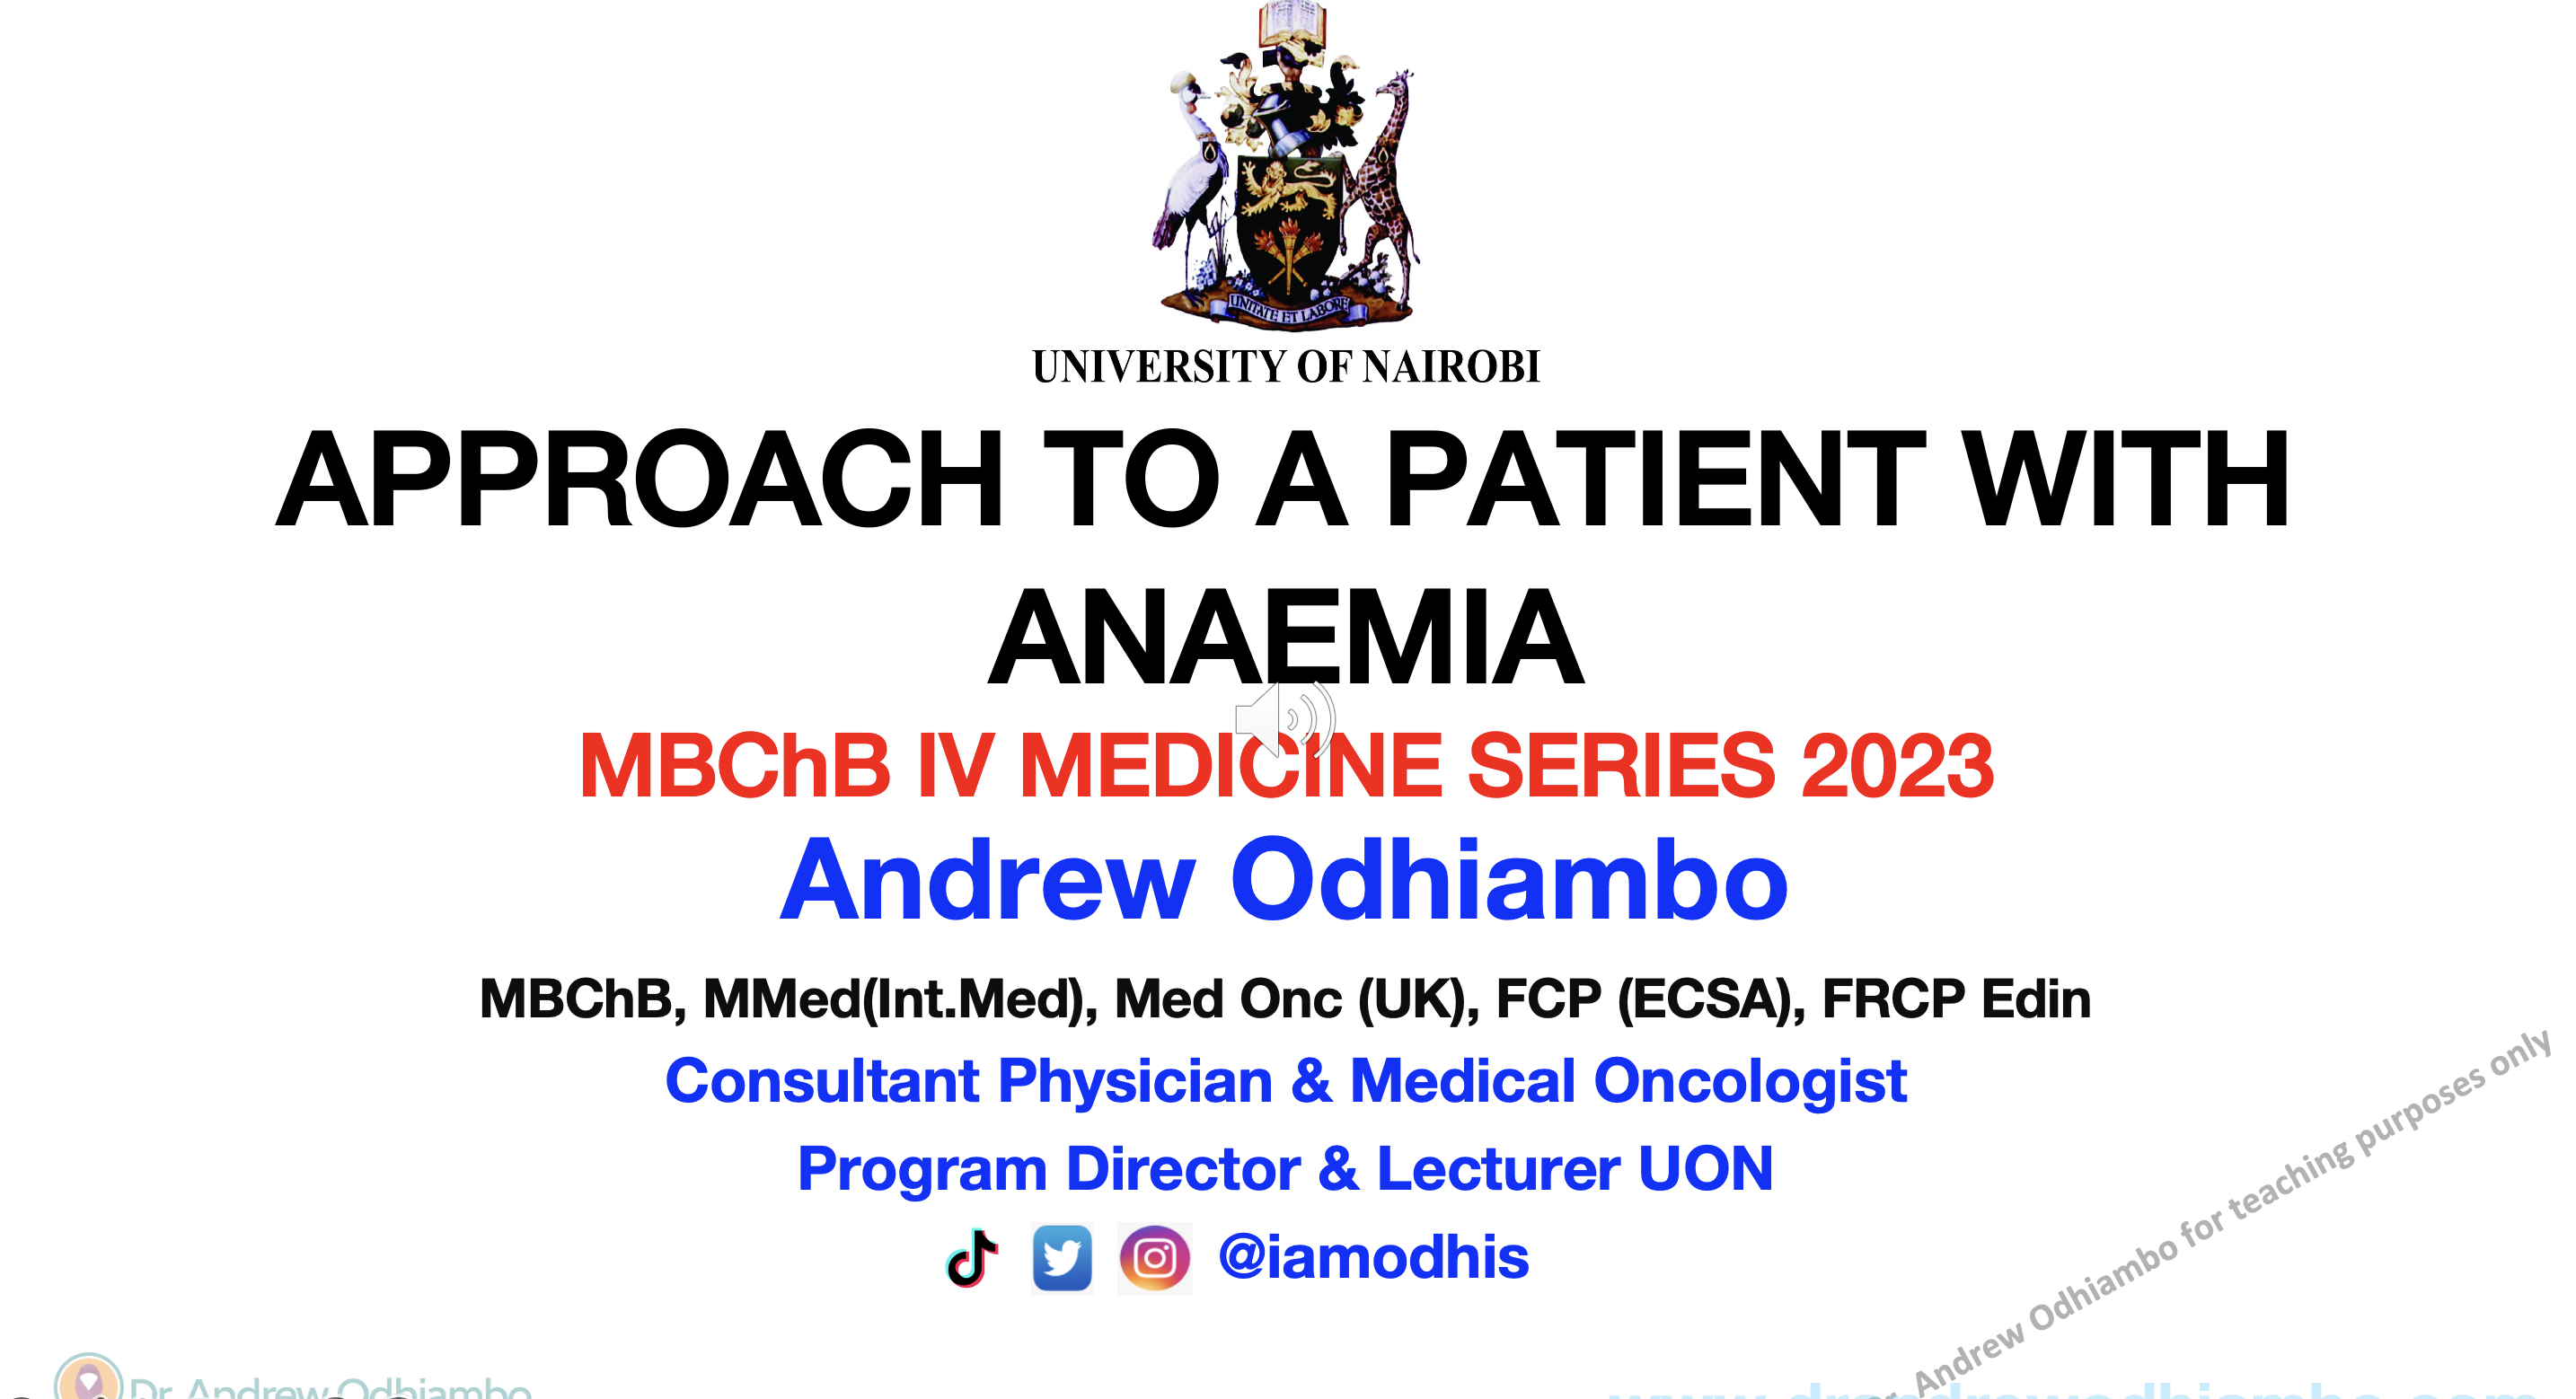 VIDEO LINK DR ANDREWS LECTURES